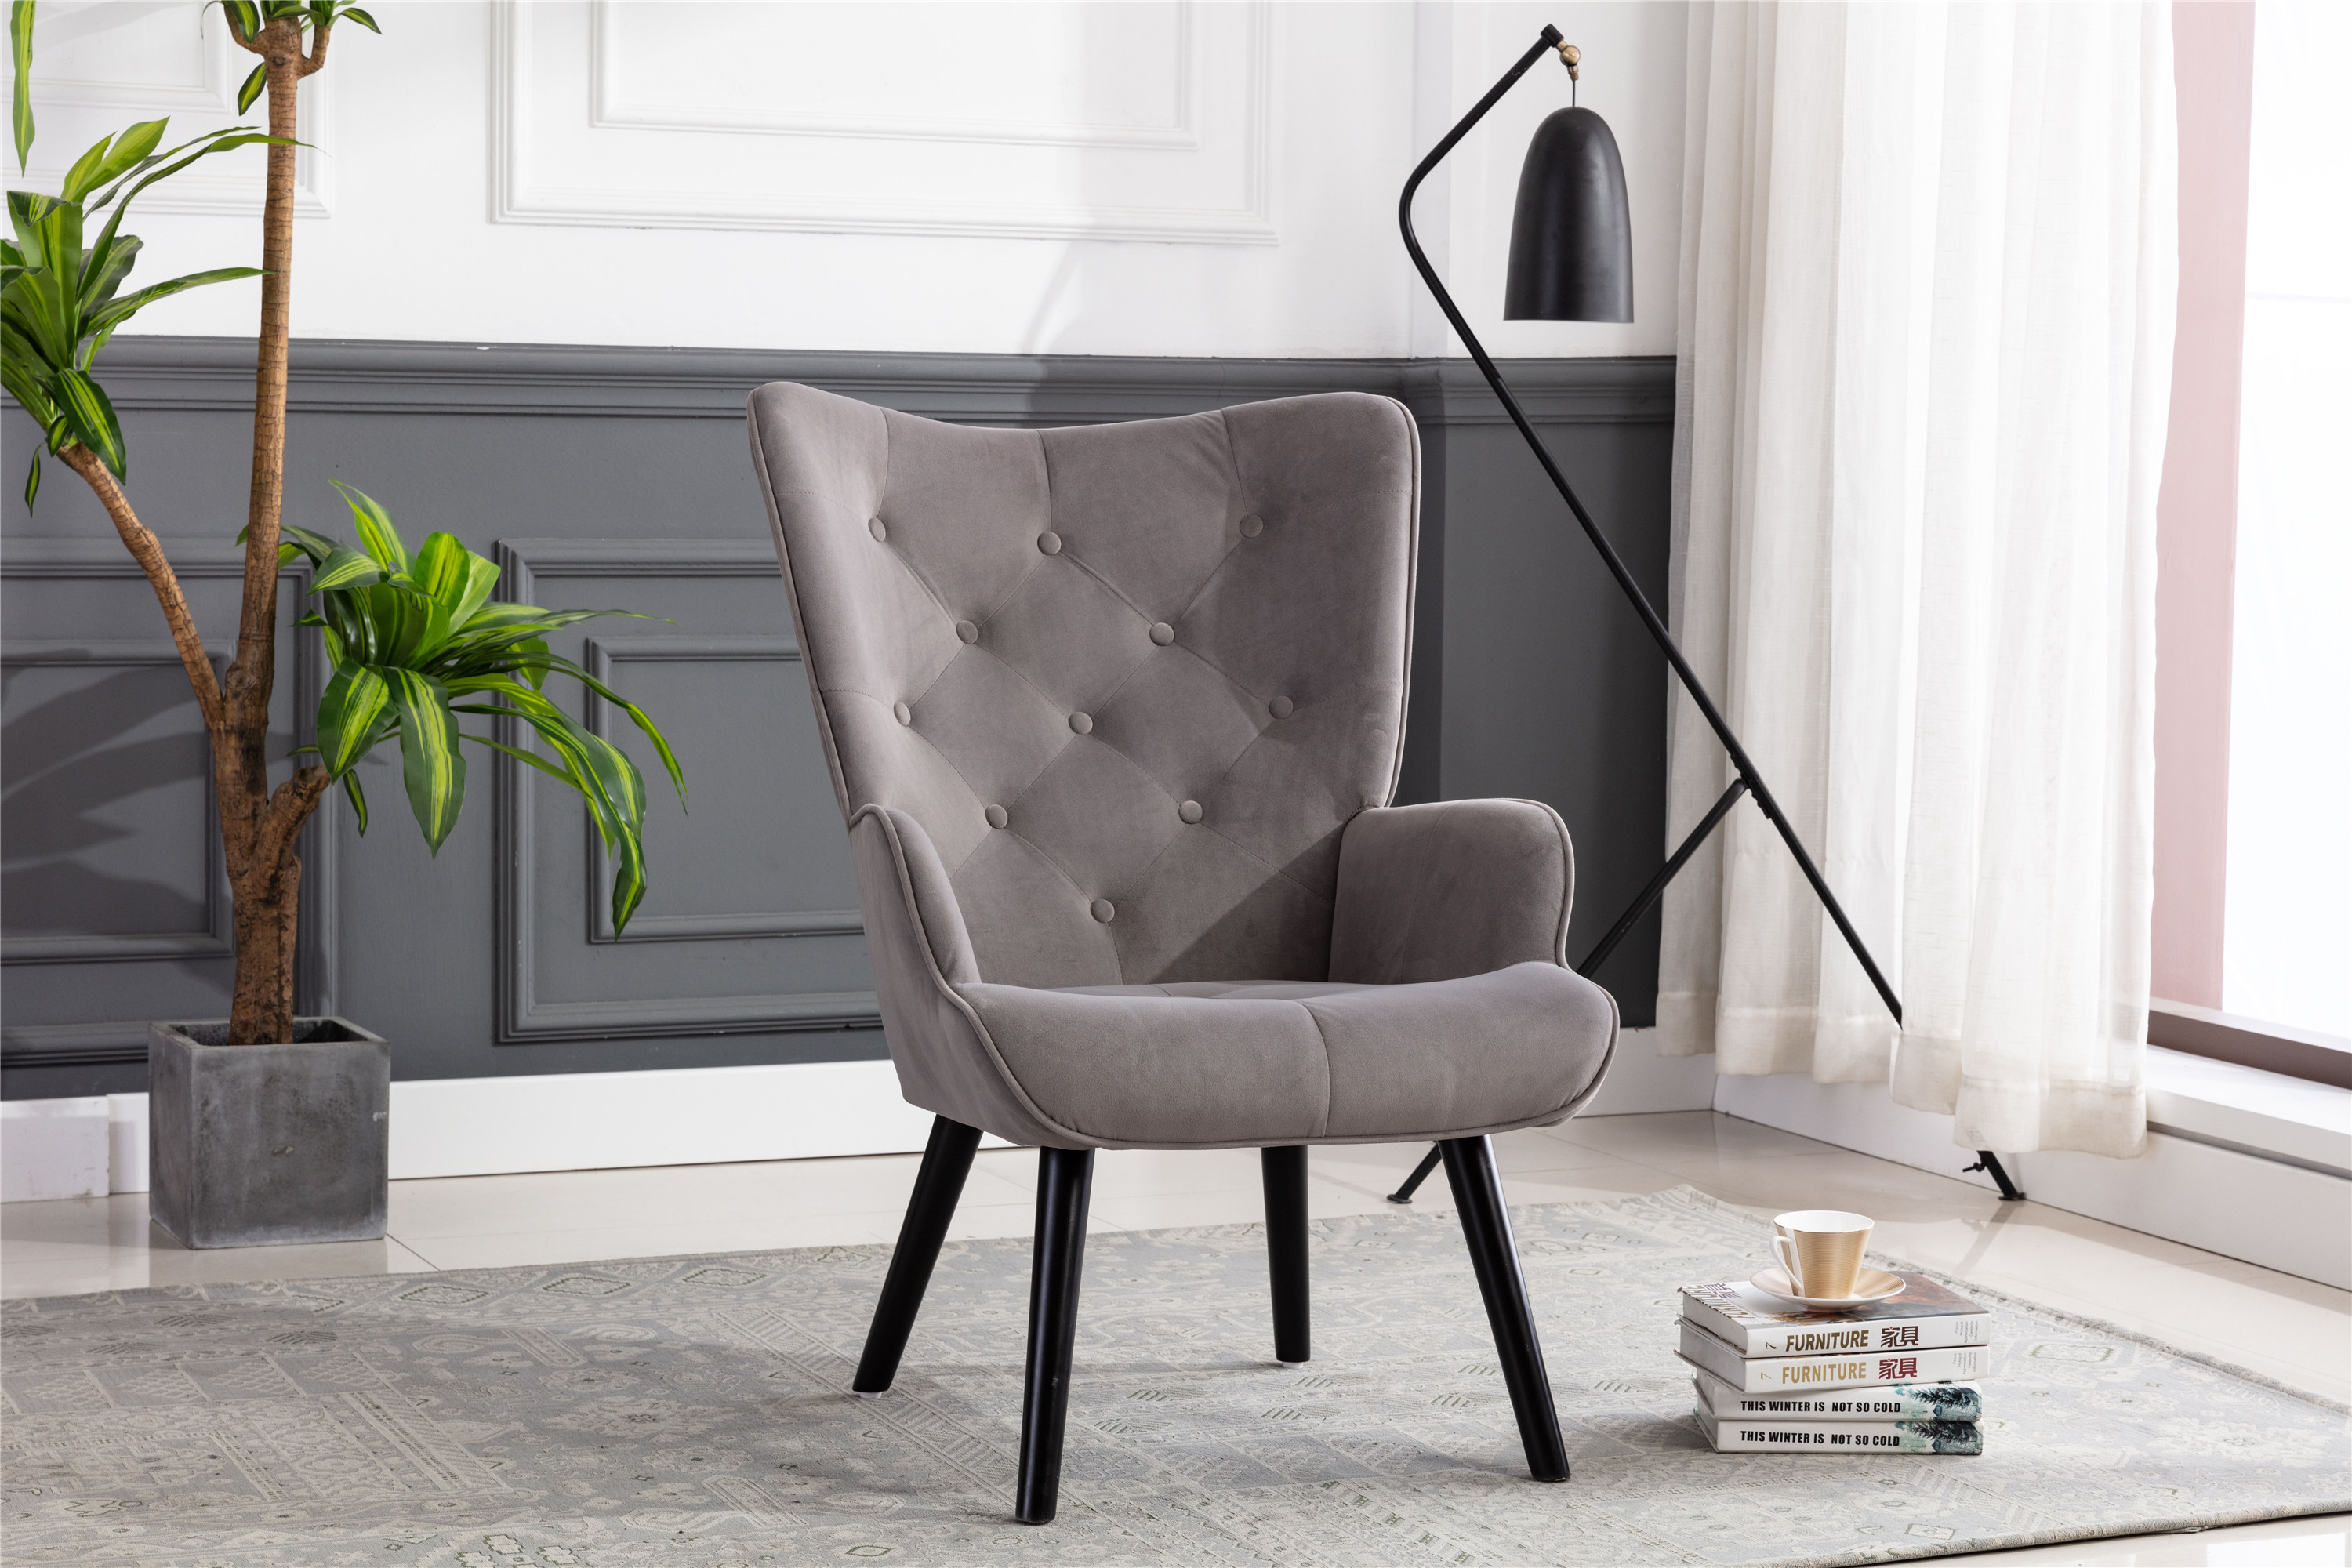 COOLMORE  Accent chair  Living Room/Bed Room, Modern Leisure  Chair  Silver  Grey-Boyel Living